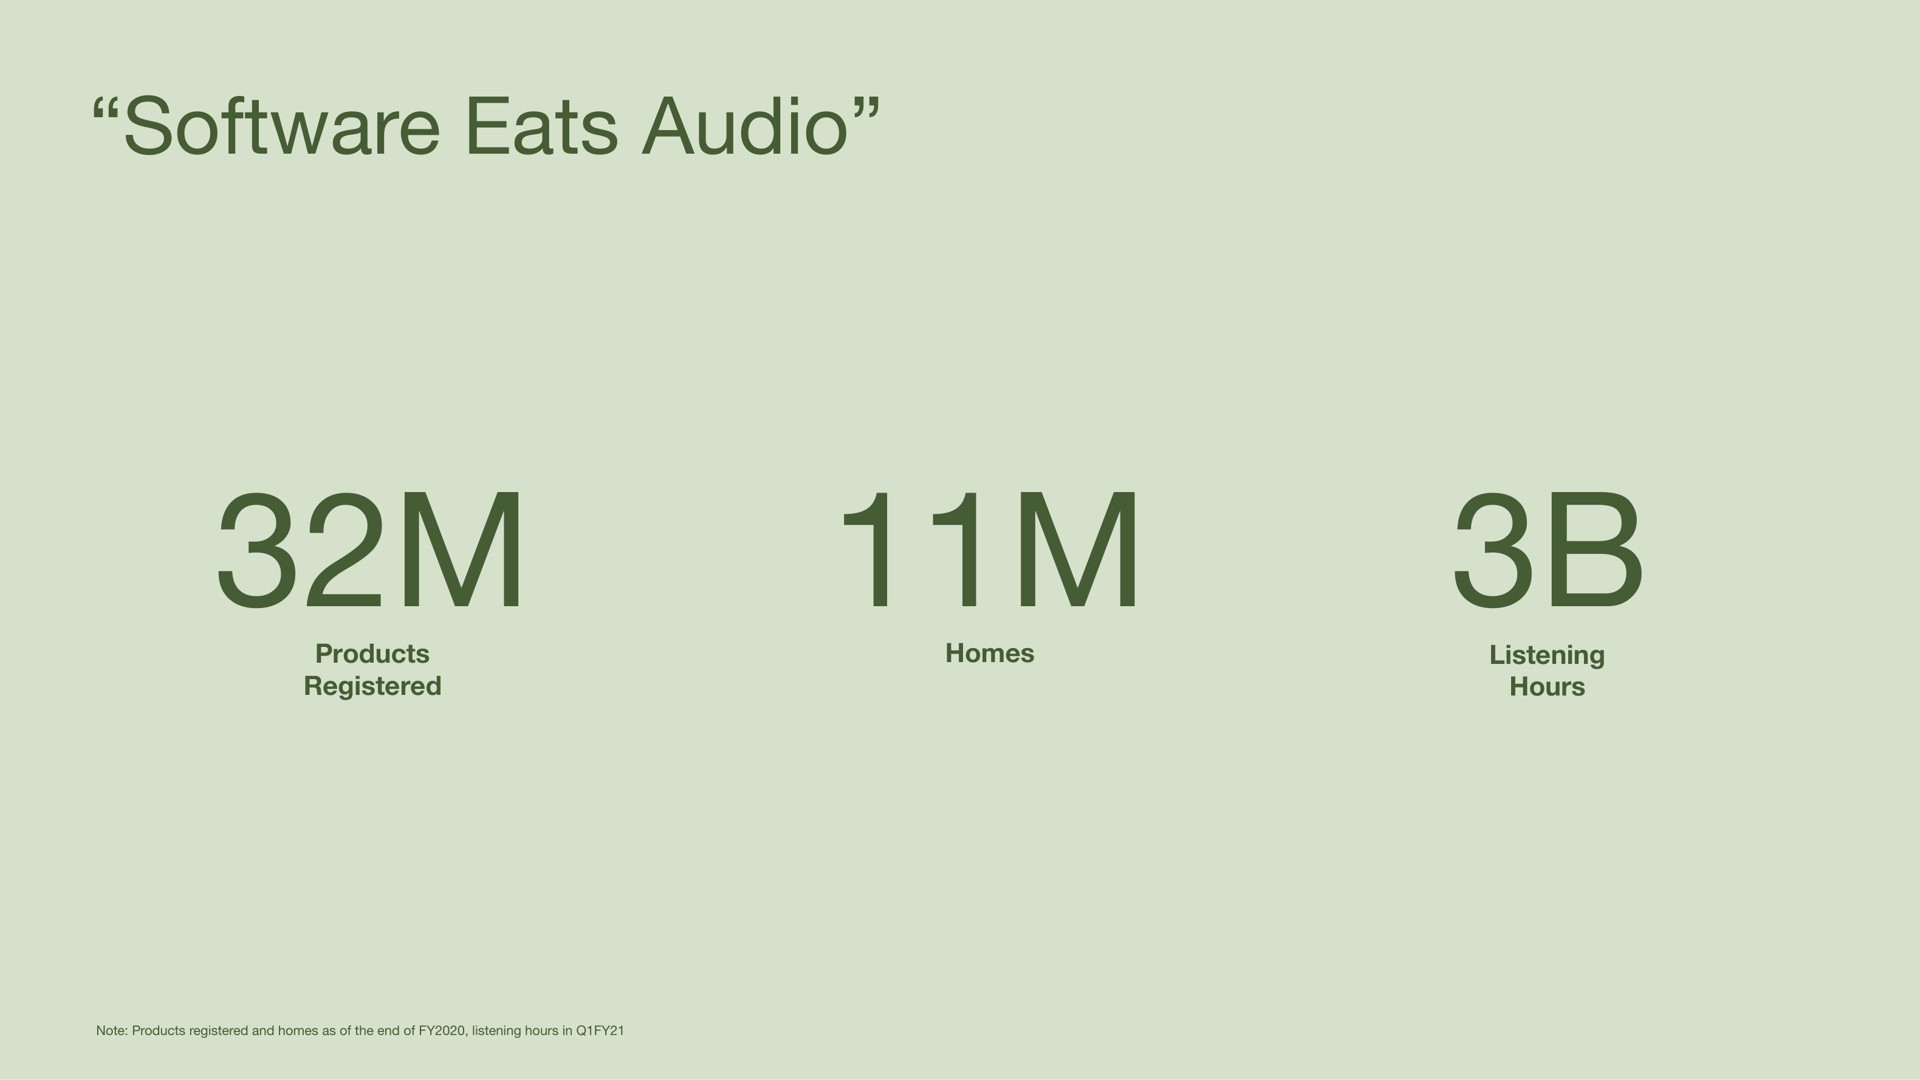 eats audio products registered homes listening hours note products registered and homes as of the end of listening hours in | Sonos